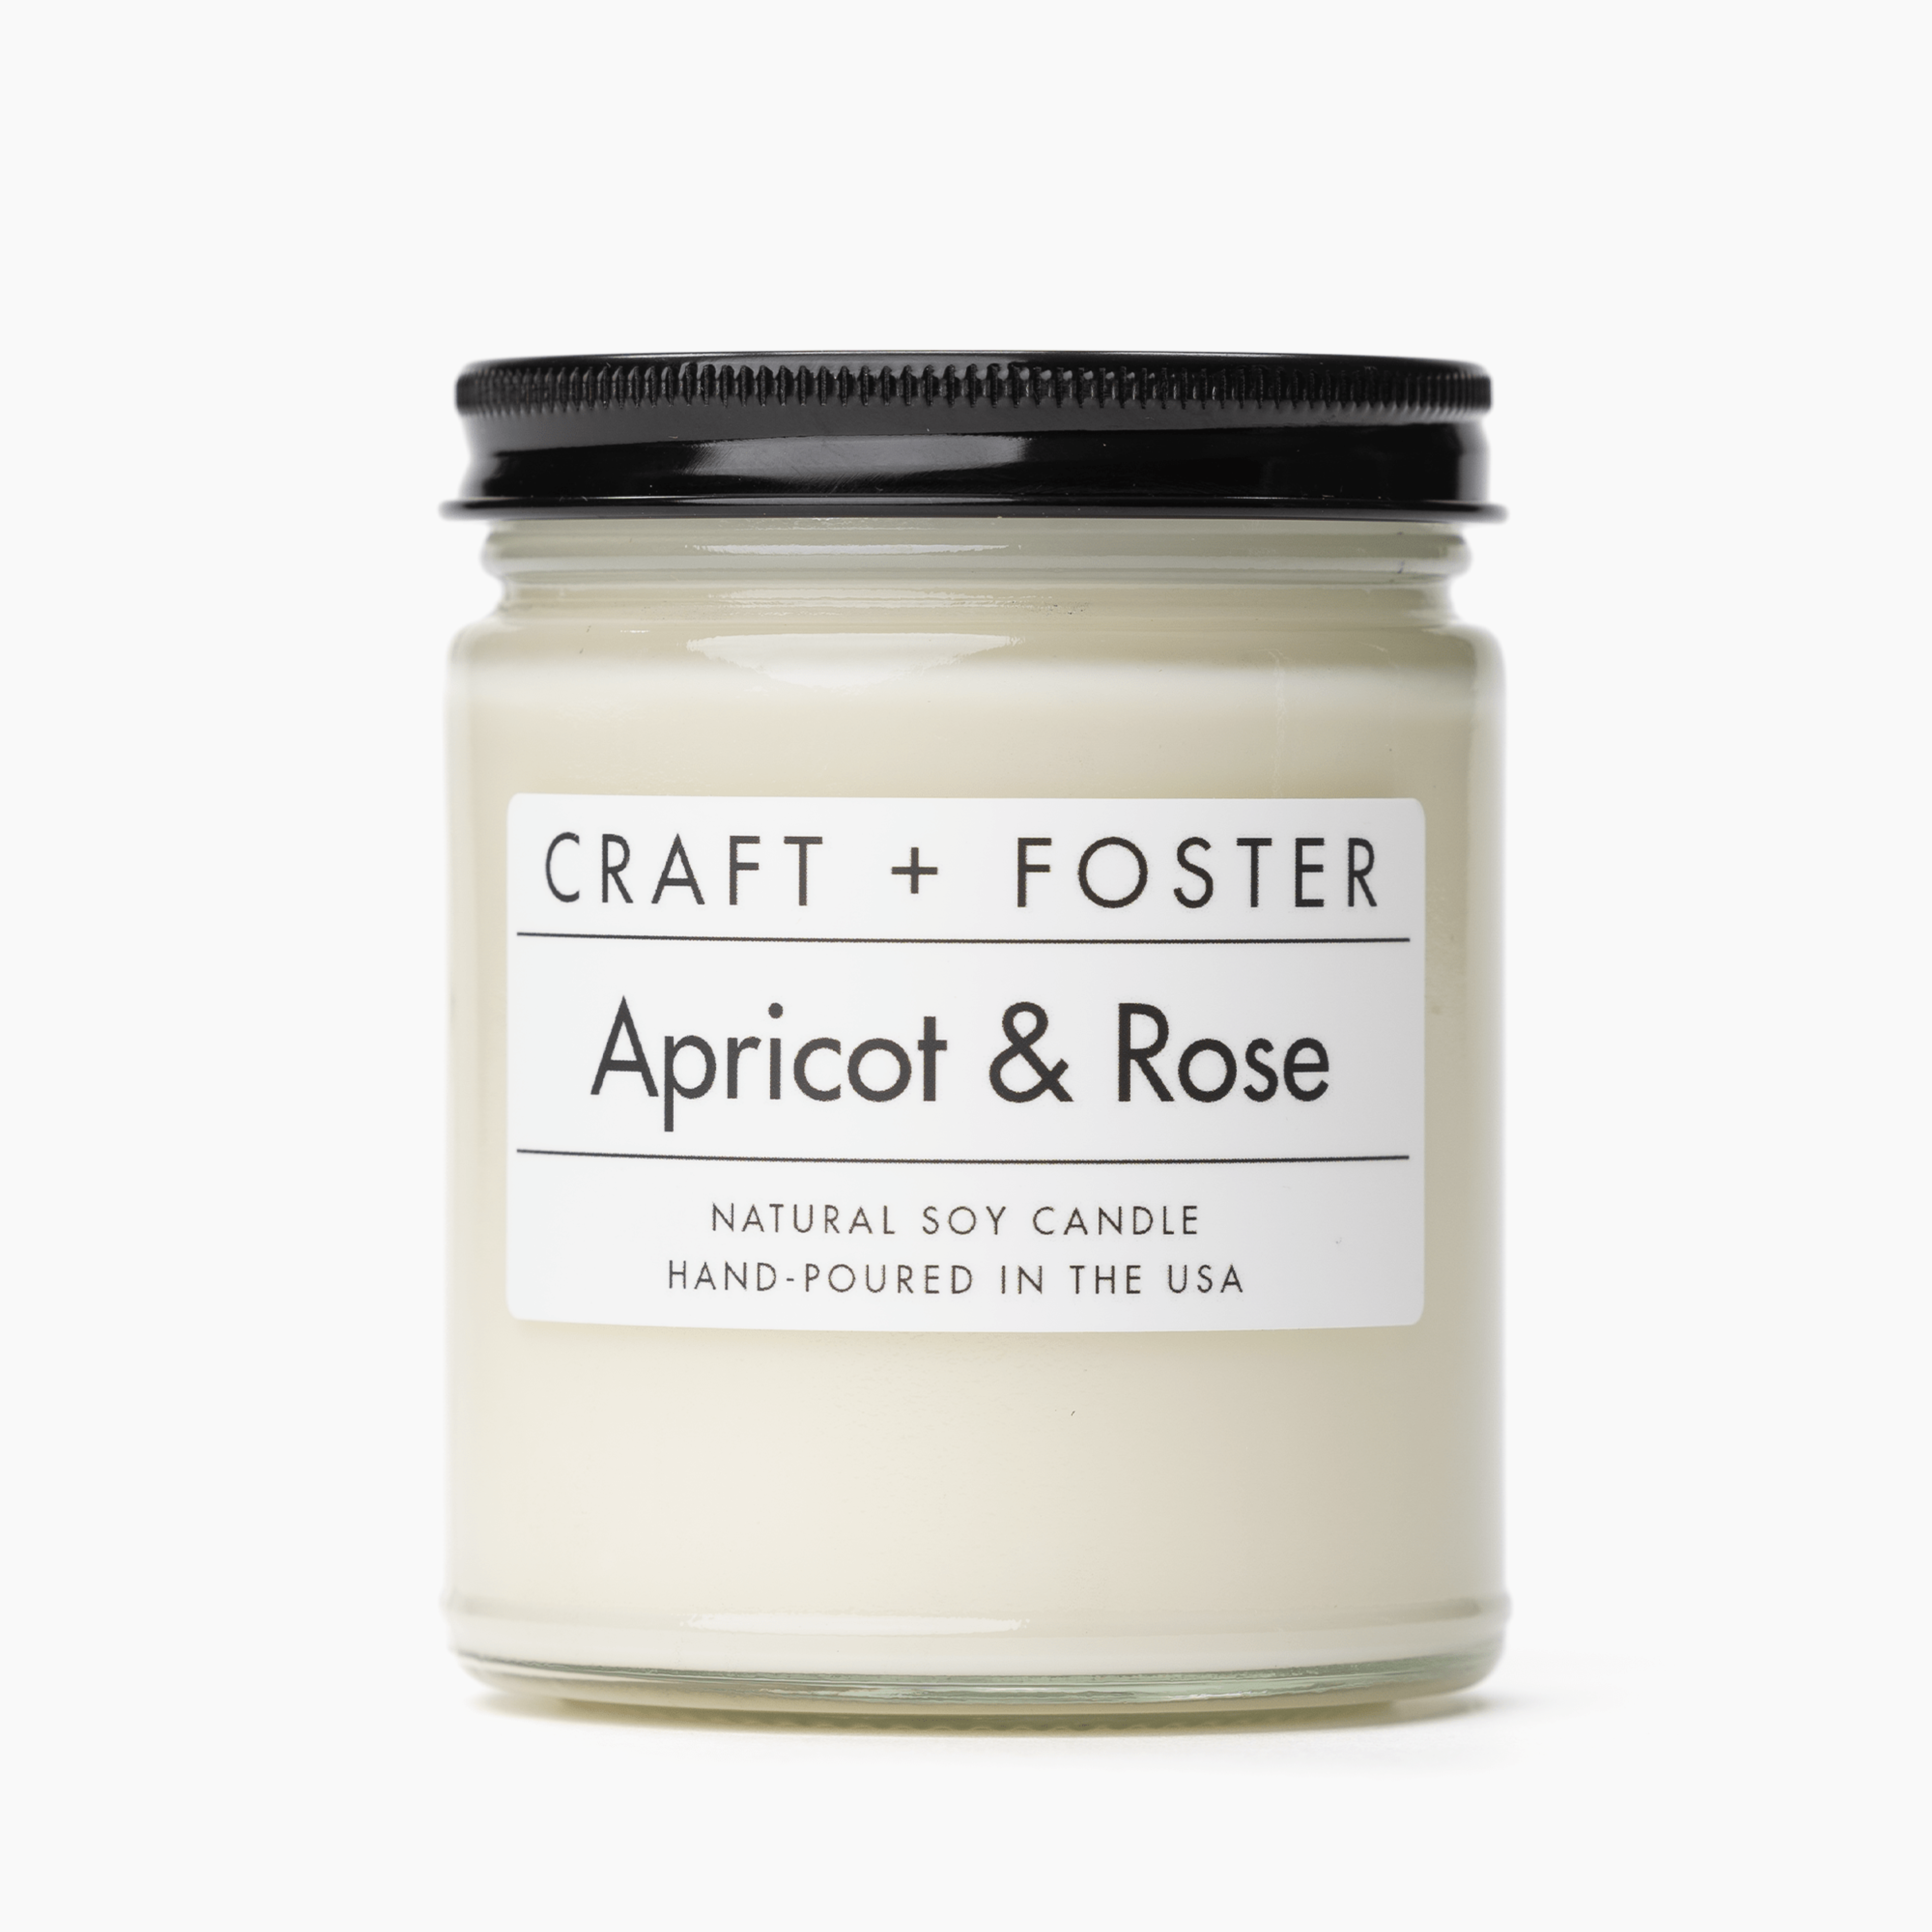 Apricot & Rose - Natural Soy Wax Candle